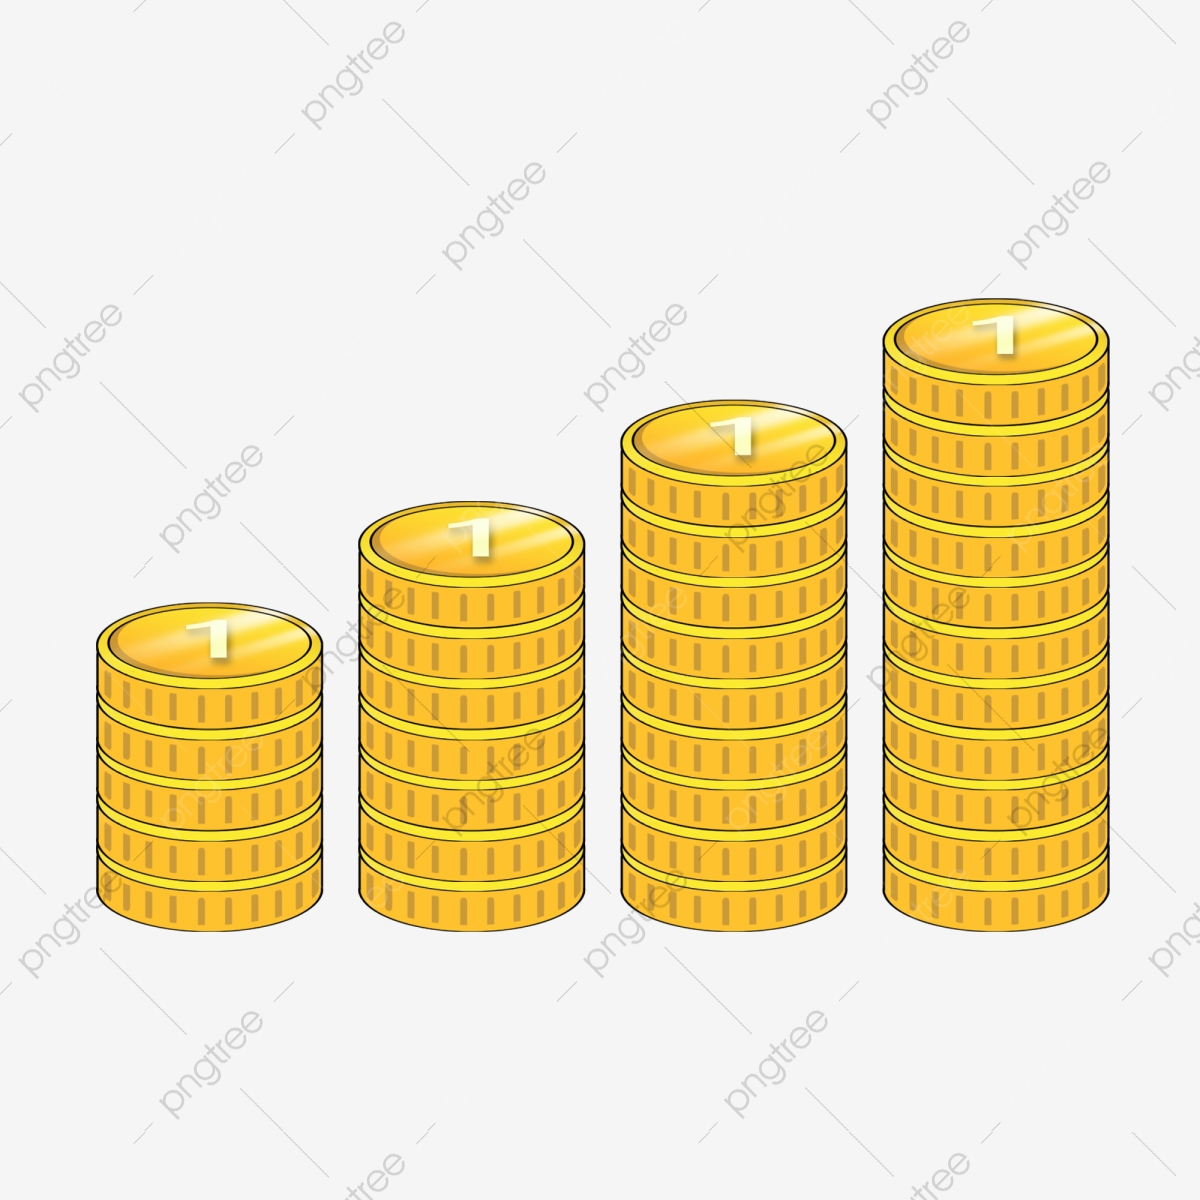 Financial currency business finance. Coin clipart finances